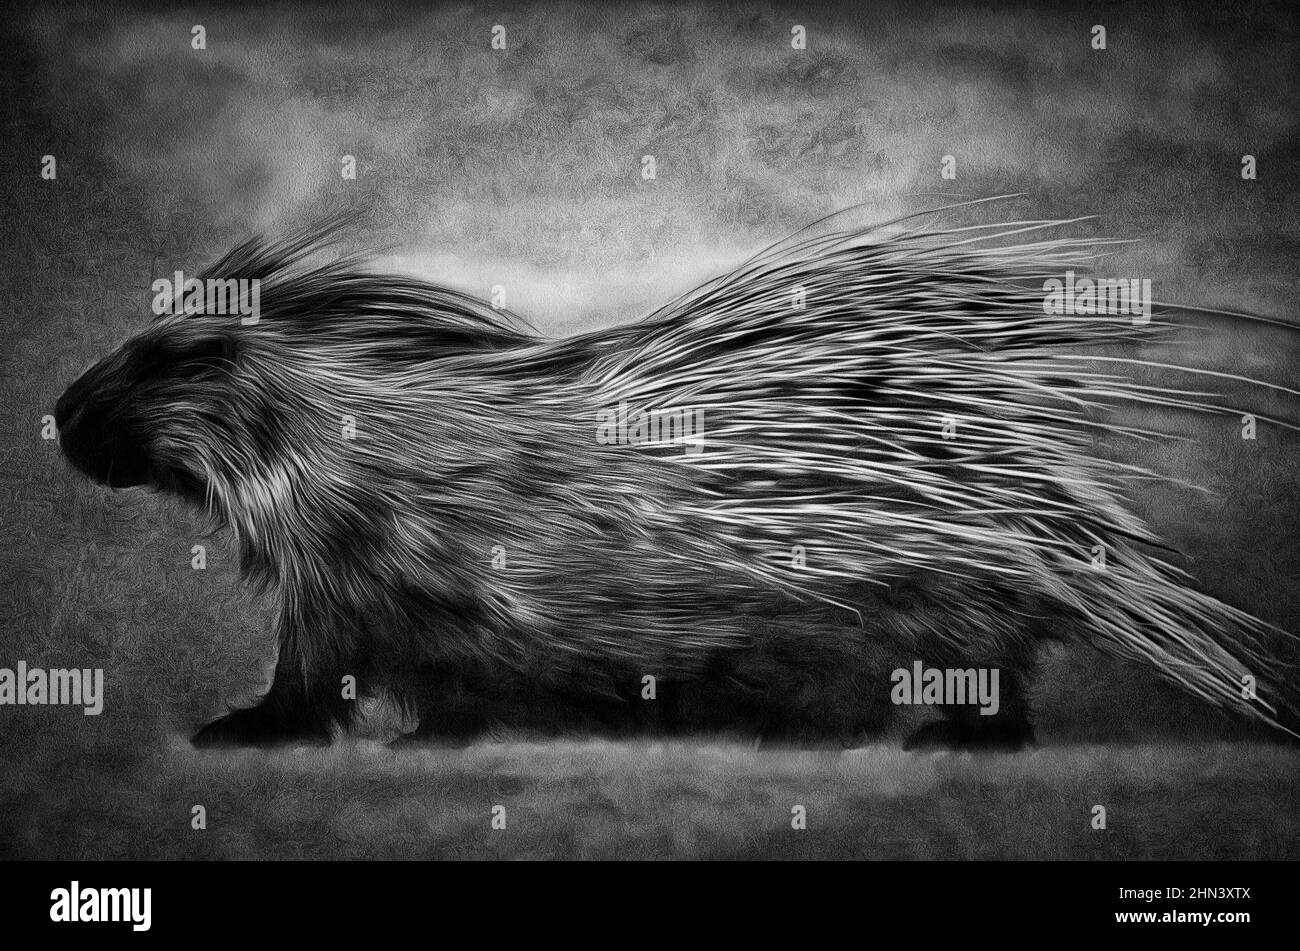 Indian porcupine (lat. Hystrix indica) - Old World porcupine family pet (Hystricidae), Illustrations Stock Photo